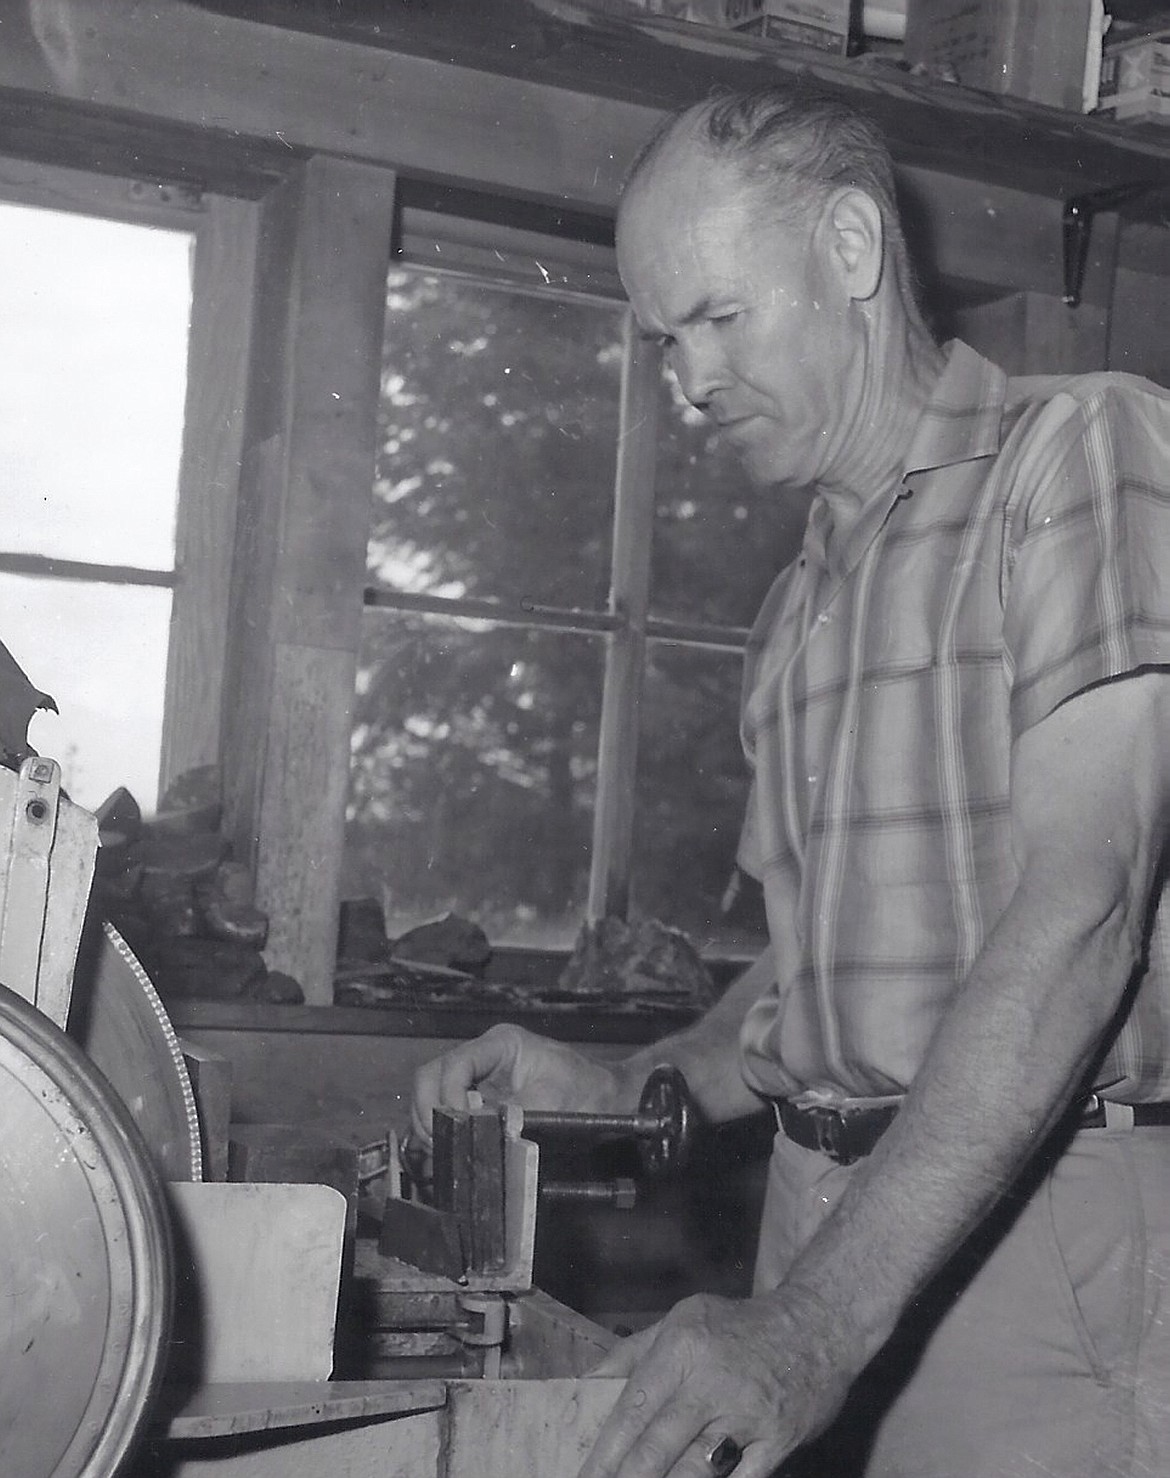 James “Jack” Kehoe working at the diamond blade “jade” saw he designed and built. Kehoe was one of the first people in the U.S. to cut and work with the jade from Canada.